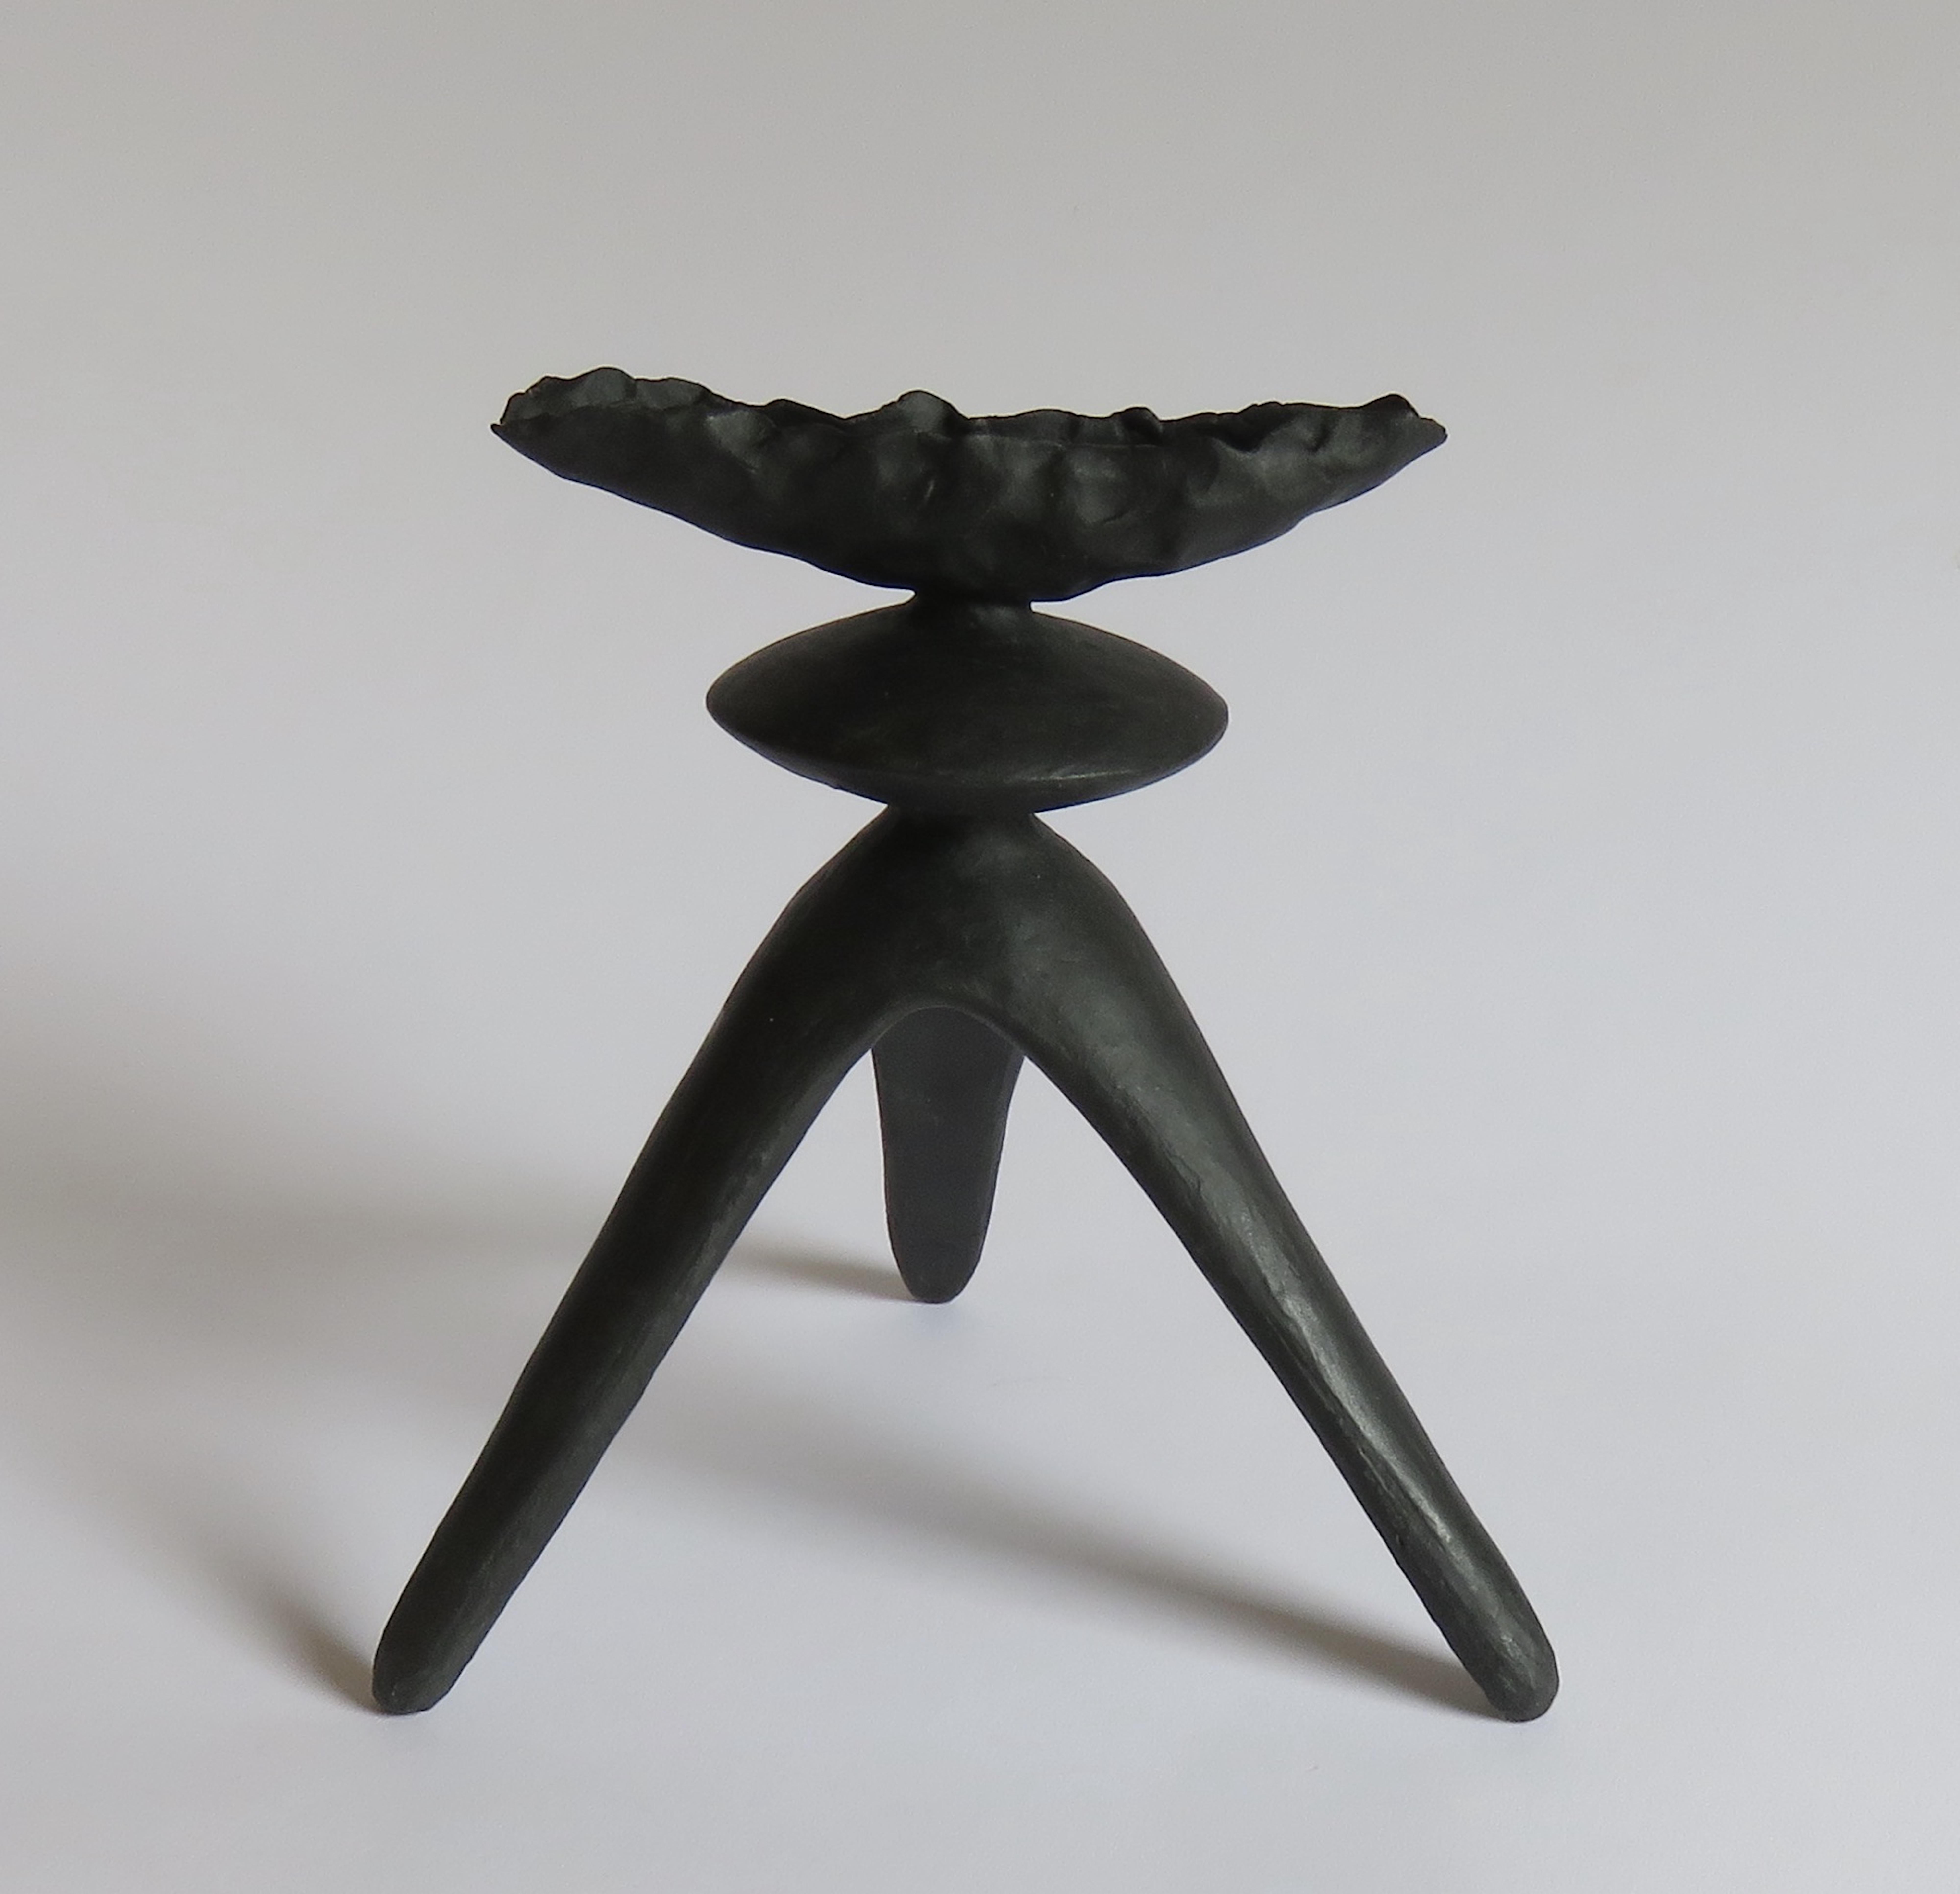 Contemporary Crimped-Top Black Ceramic TOTEM with Middle Sphere on Tripod Legs, Hand Built